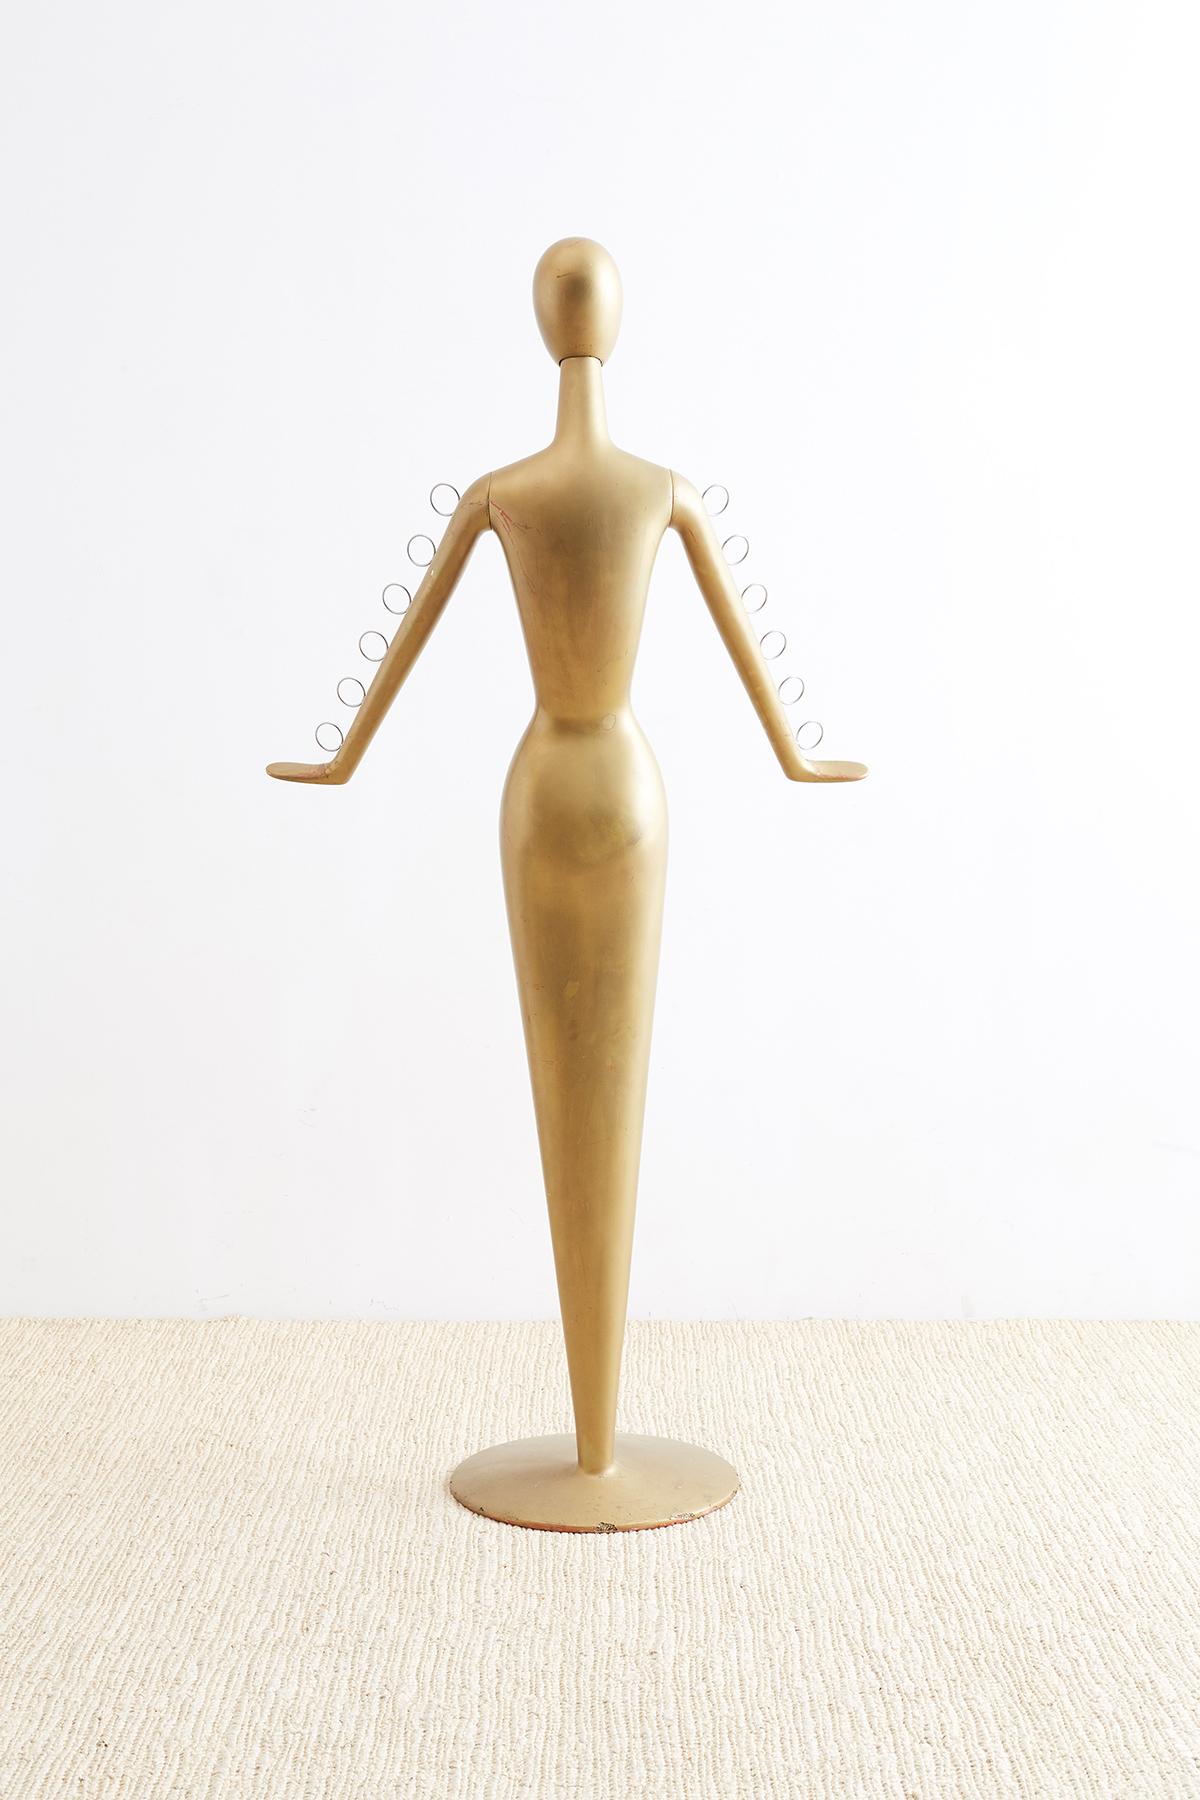 Space Age Abstract Tulip Form Female Mannequin Display Sculpture For Sale